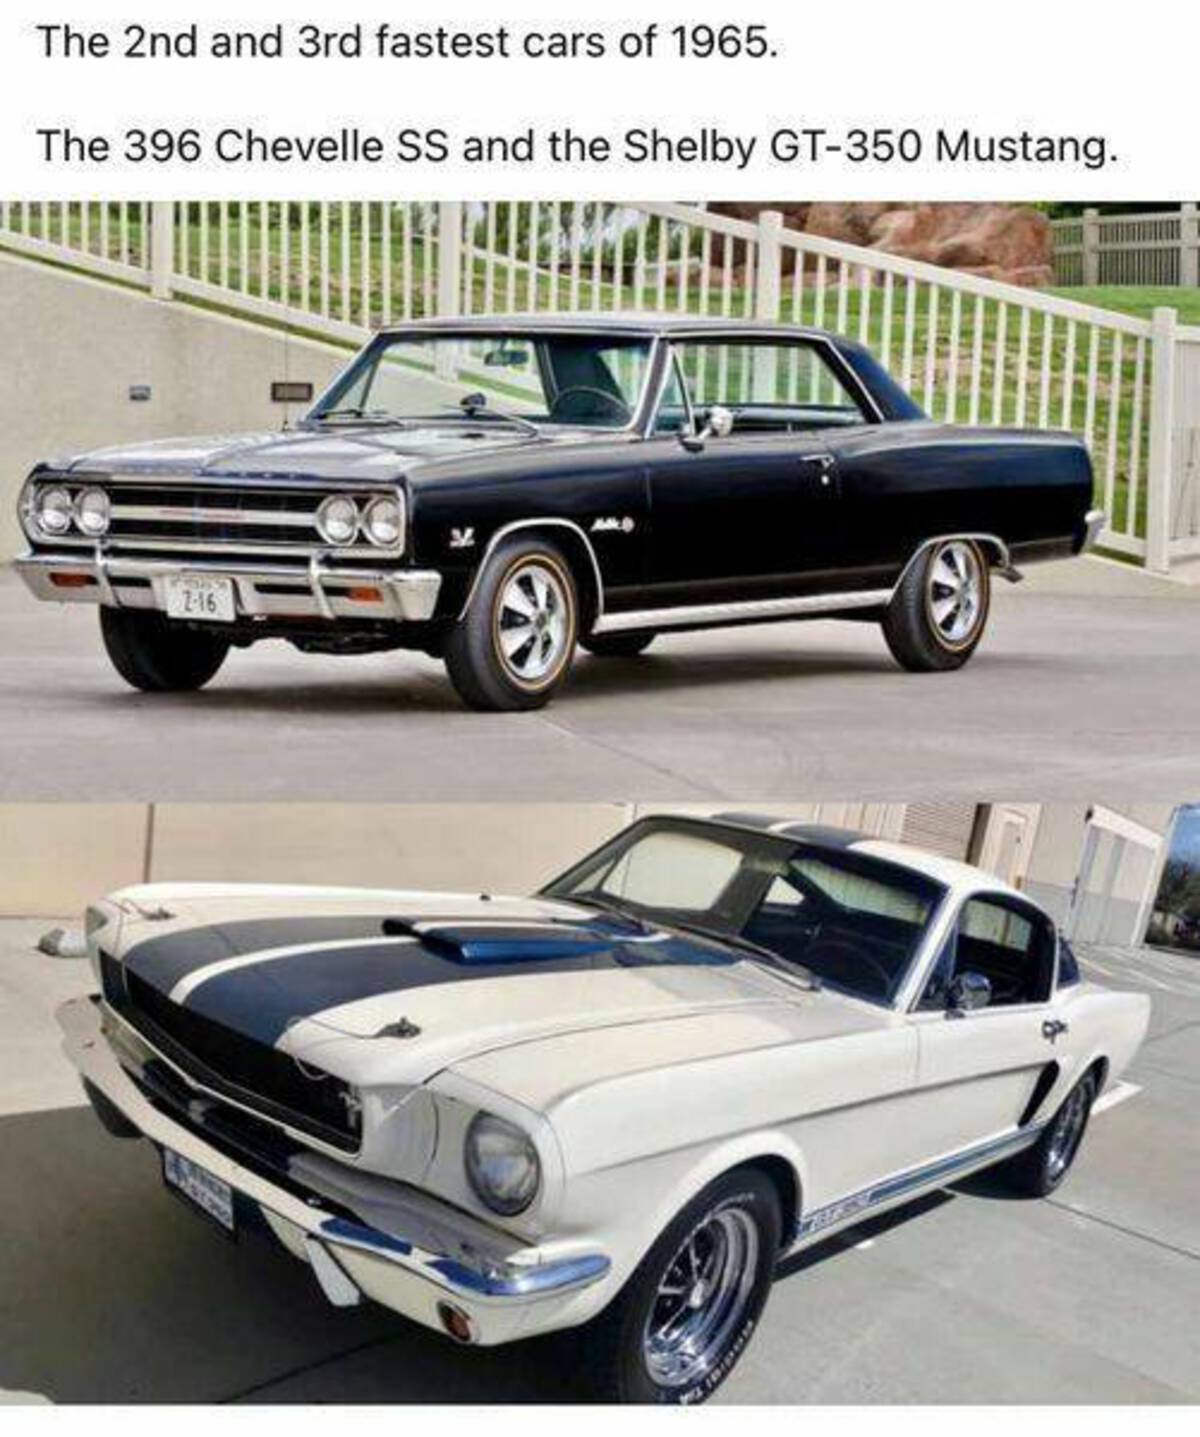 1965 chevy chevelle - The 2nd and 3rd fastest cars of 1965. The 396 Chevelle Ss and the Shelby Gt350 Mustang. 216 Radial